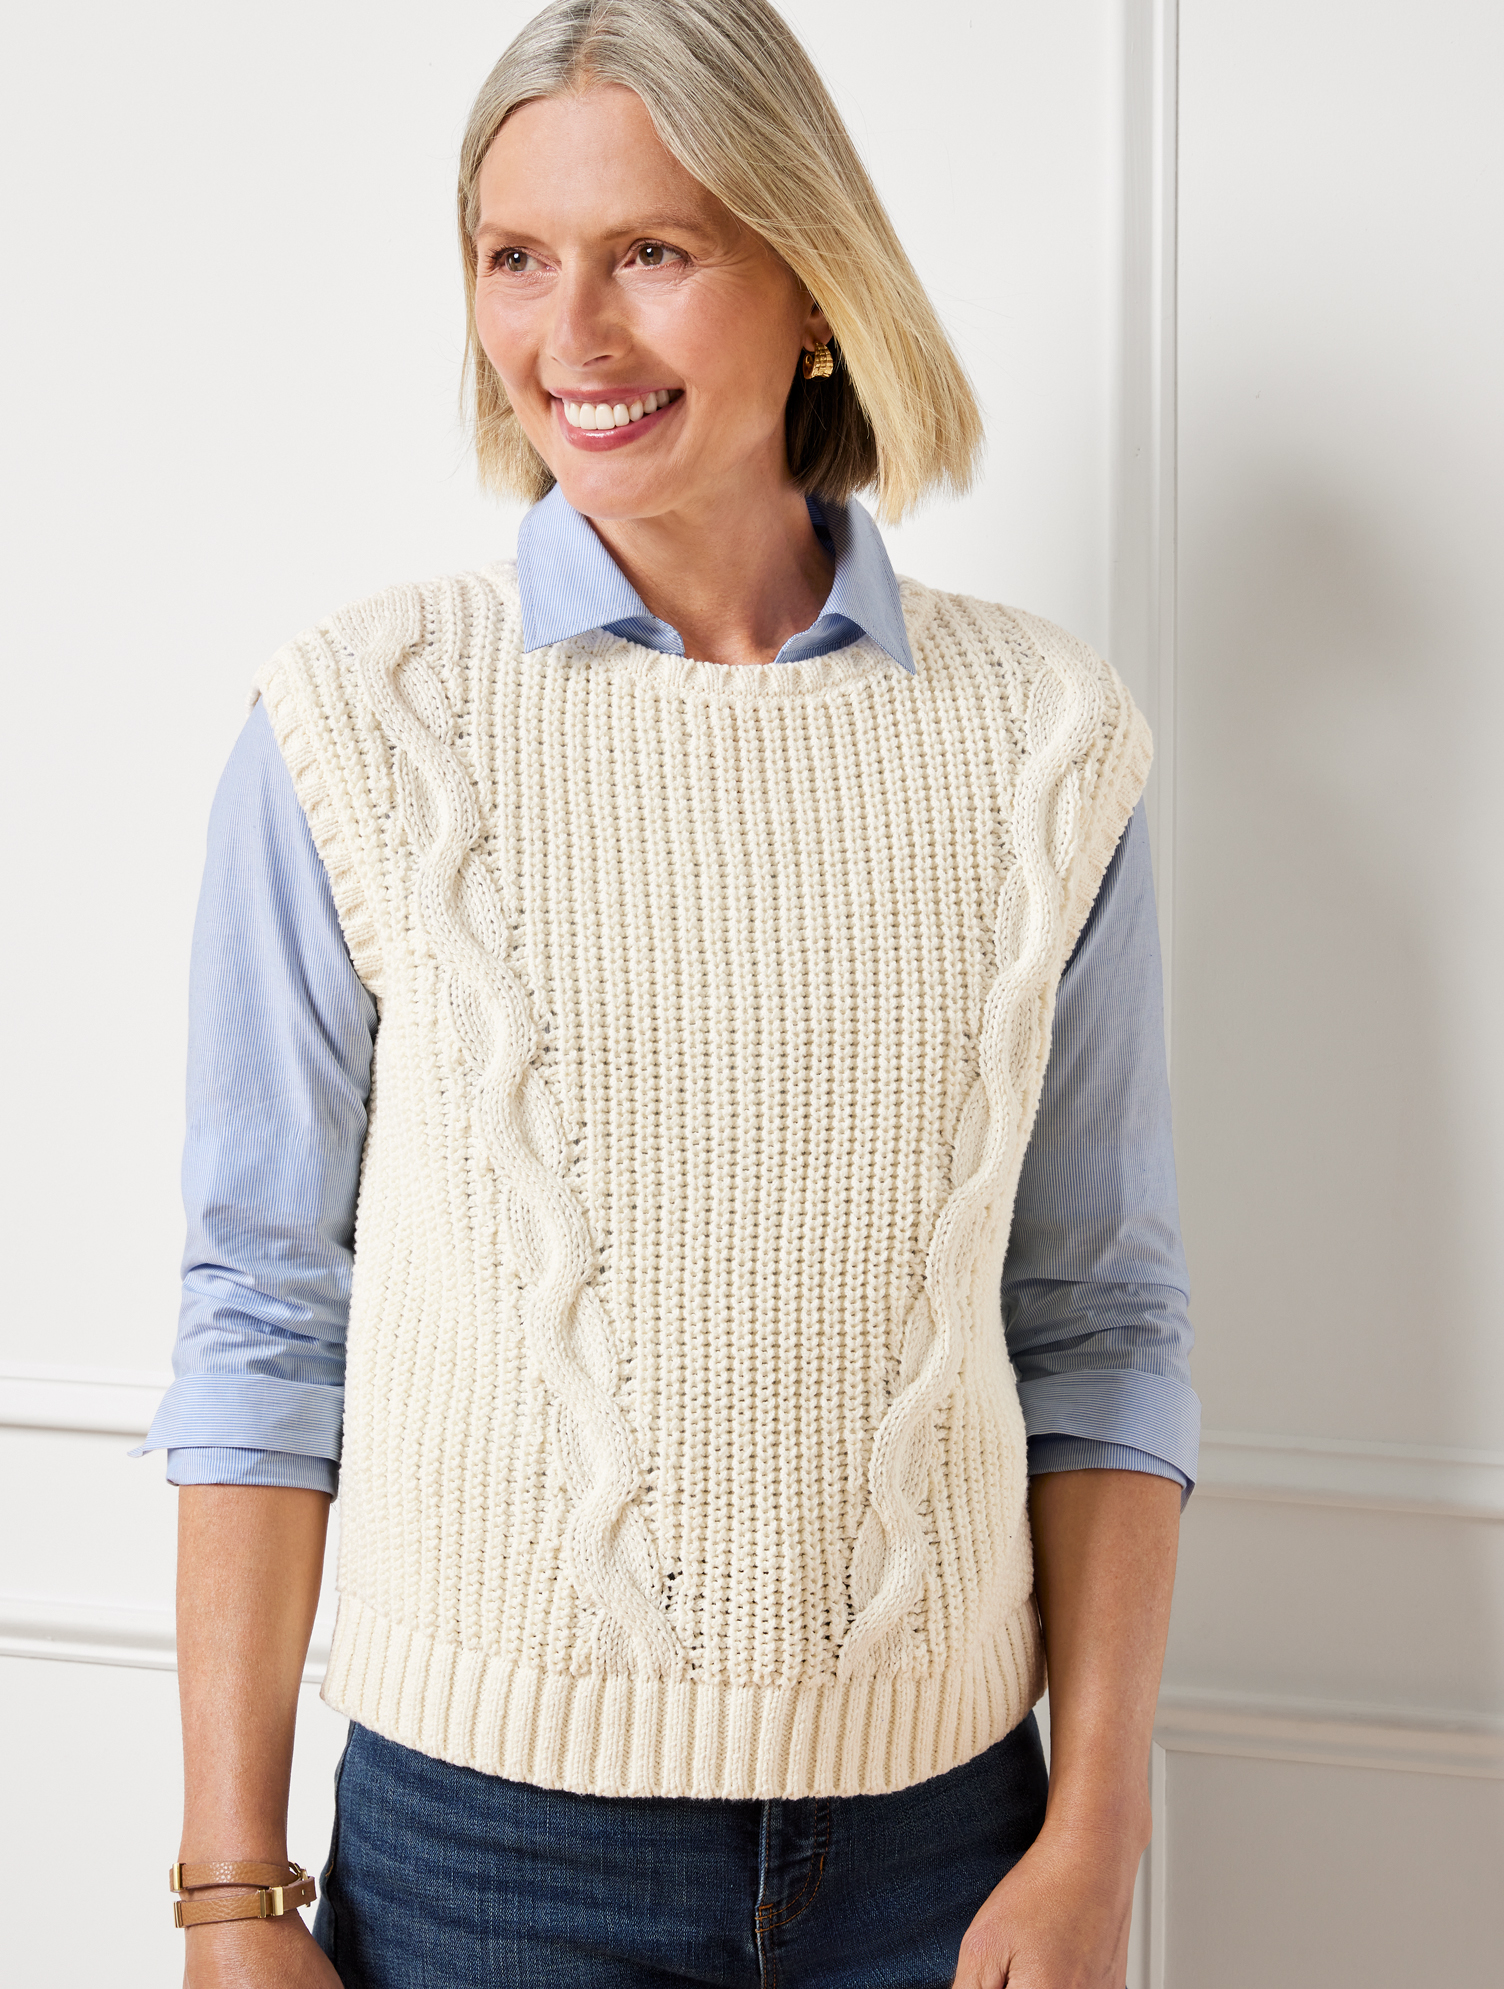 Talbots Convertible Cowl-neck Cable Knit Vest - Ivory - 3x